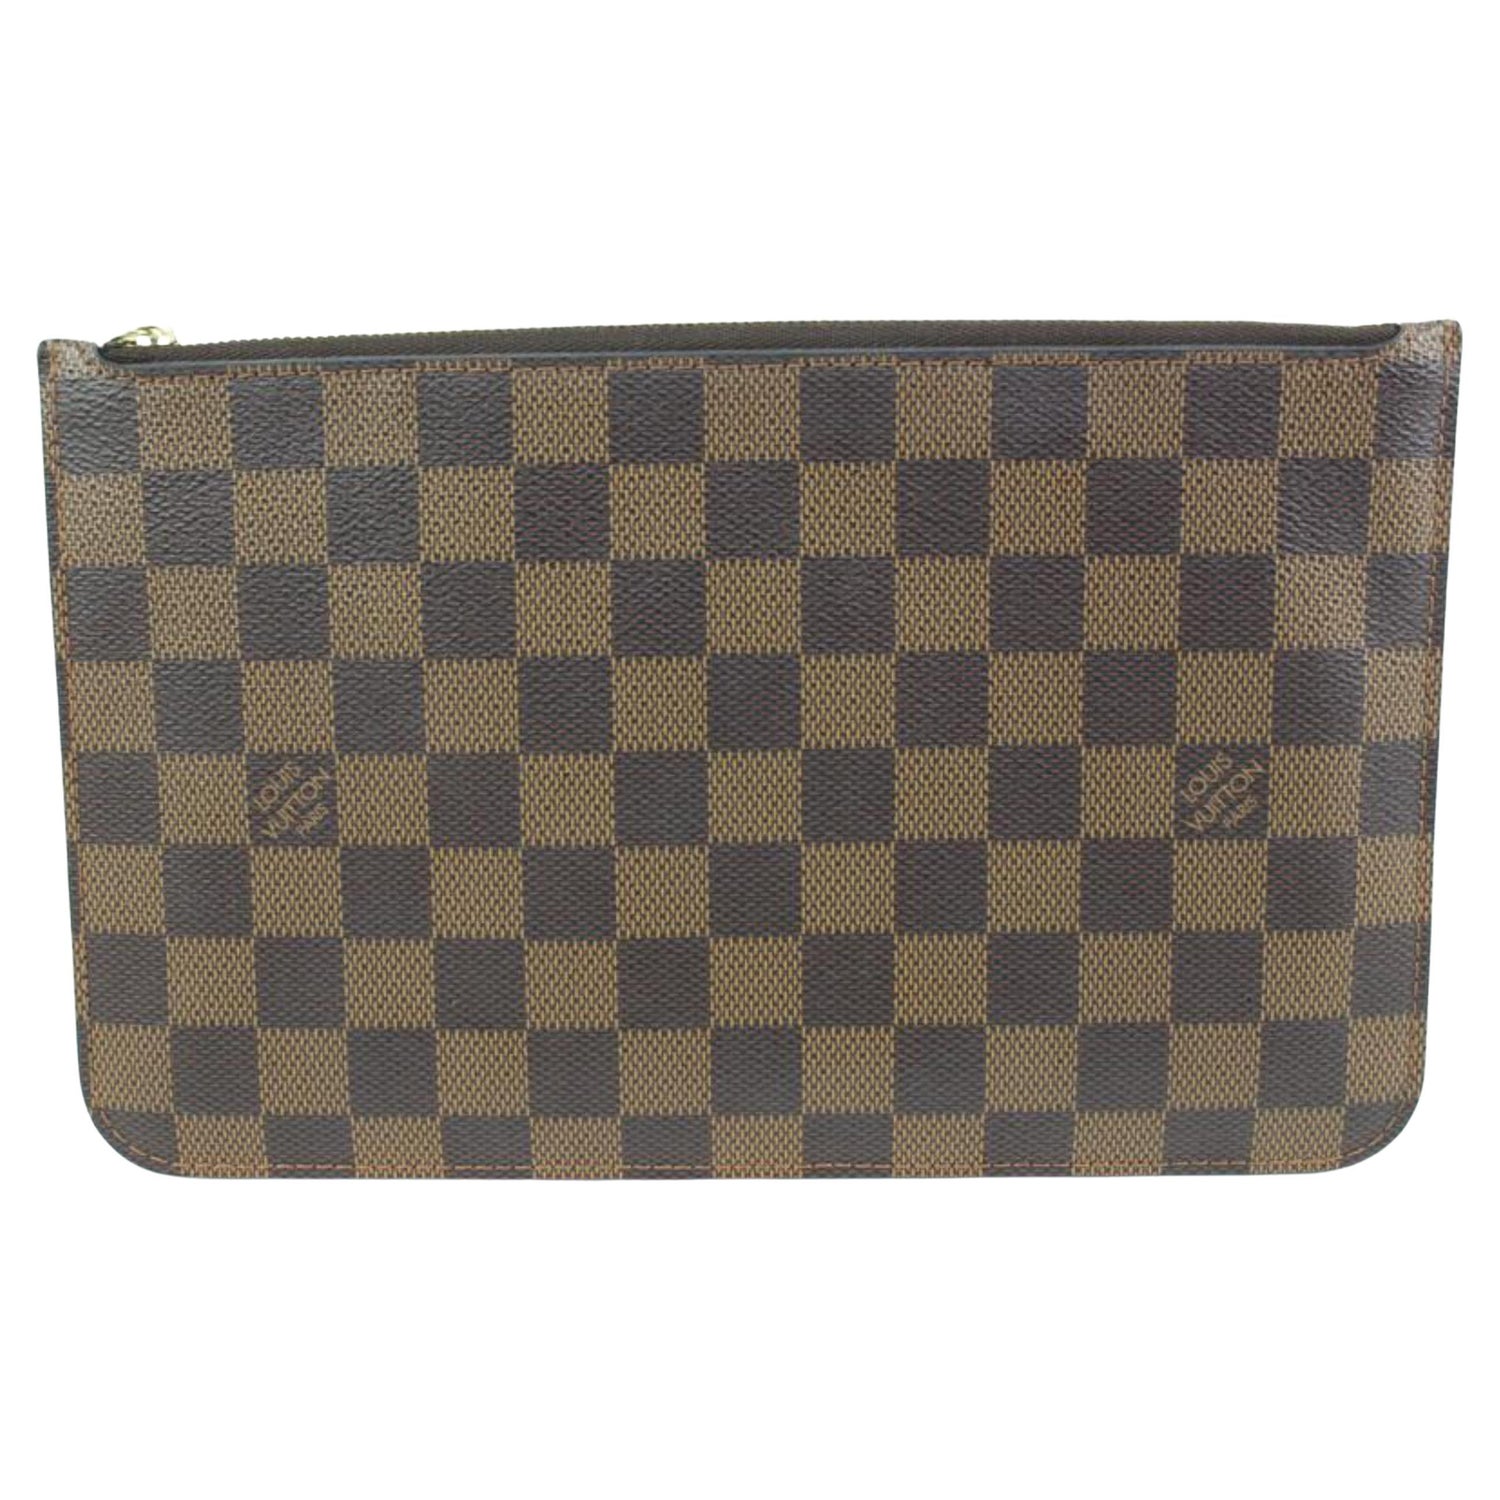 Louis Vuitton Neverfull Clutch - 4 For Sale on 1stDibs  louis vuitton  neverfull clutch bag, lv neverfull clutch, neverfull clutch louis vuitton